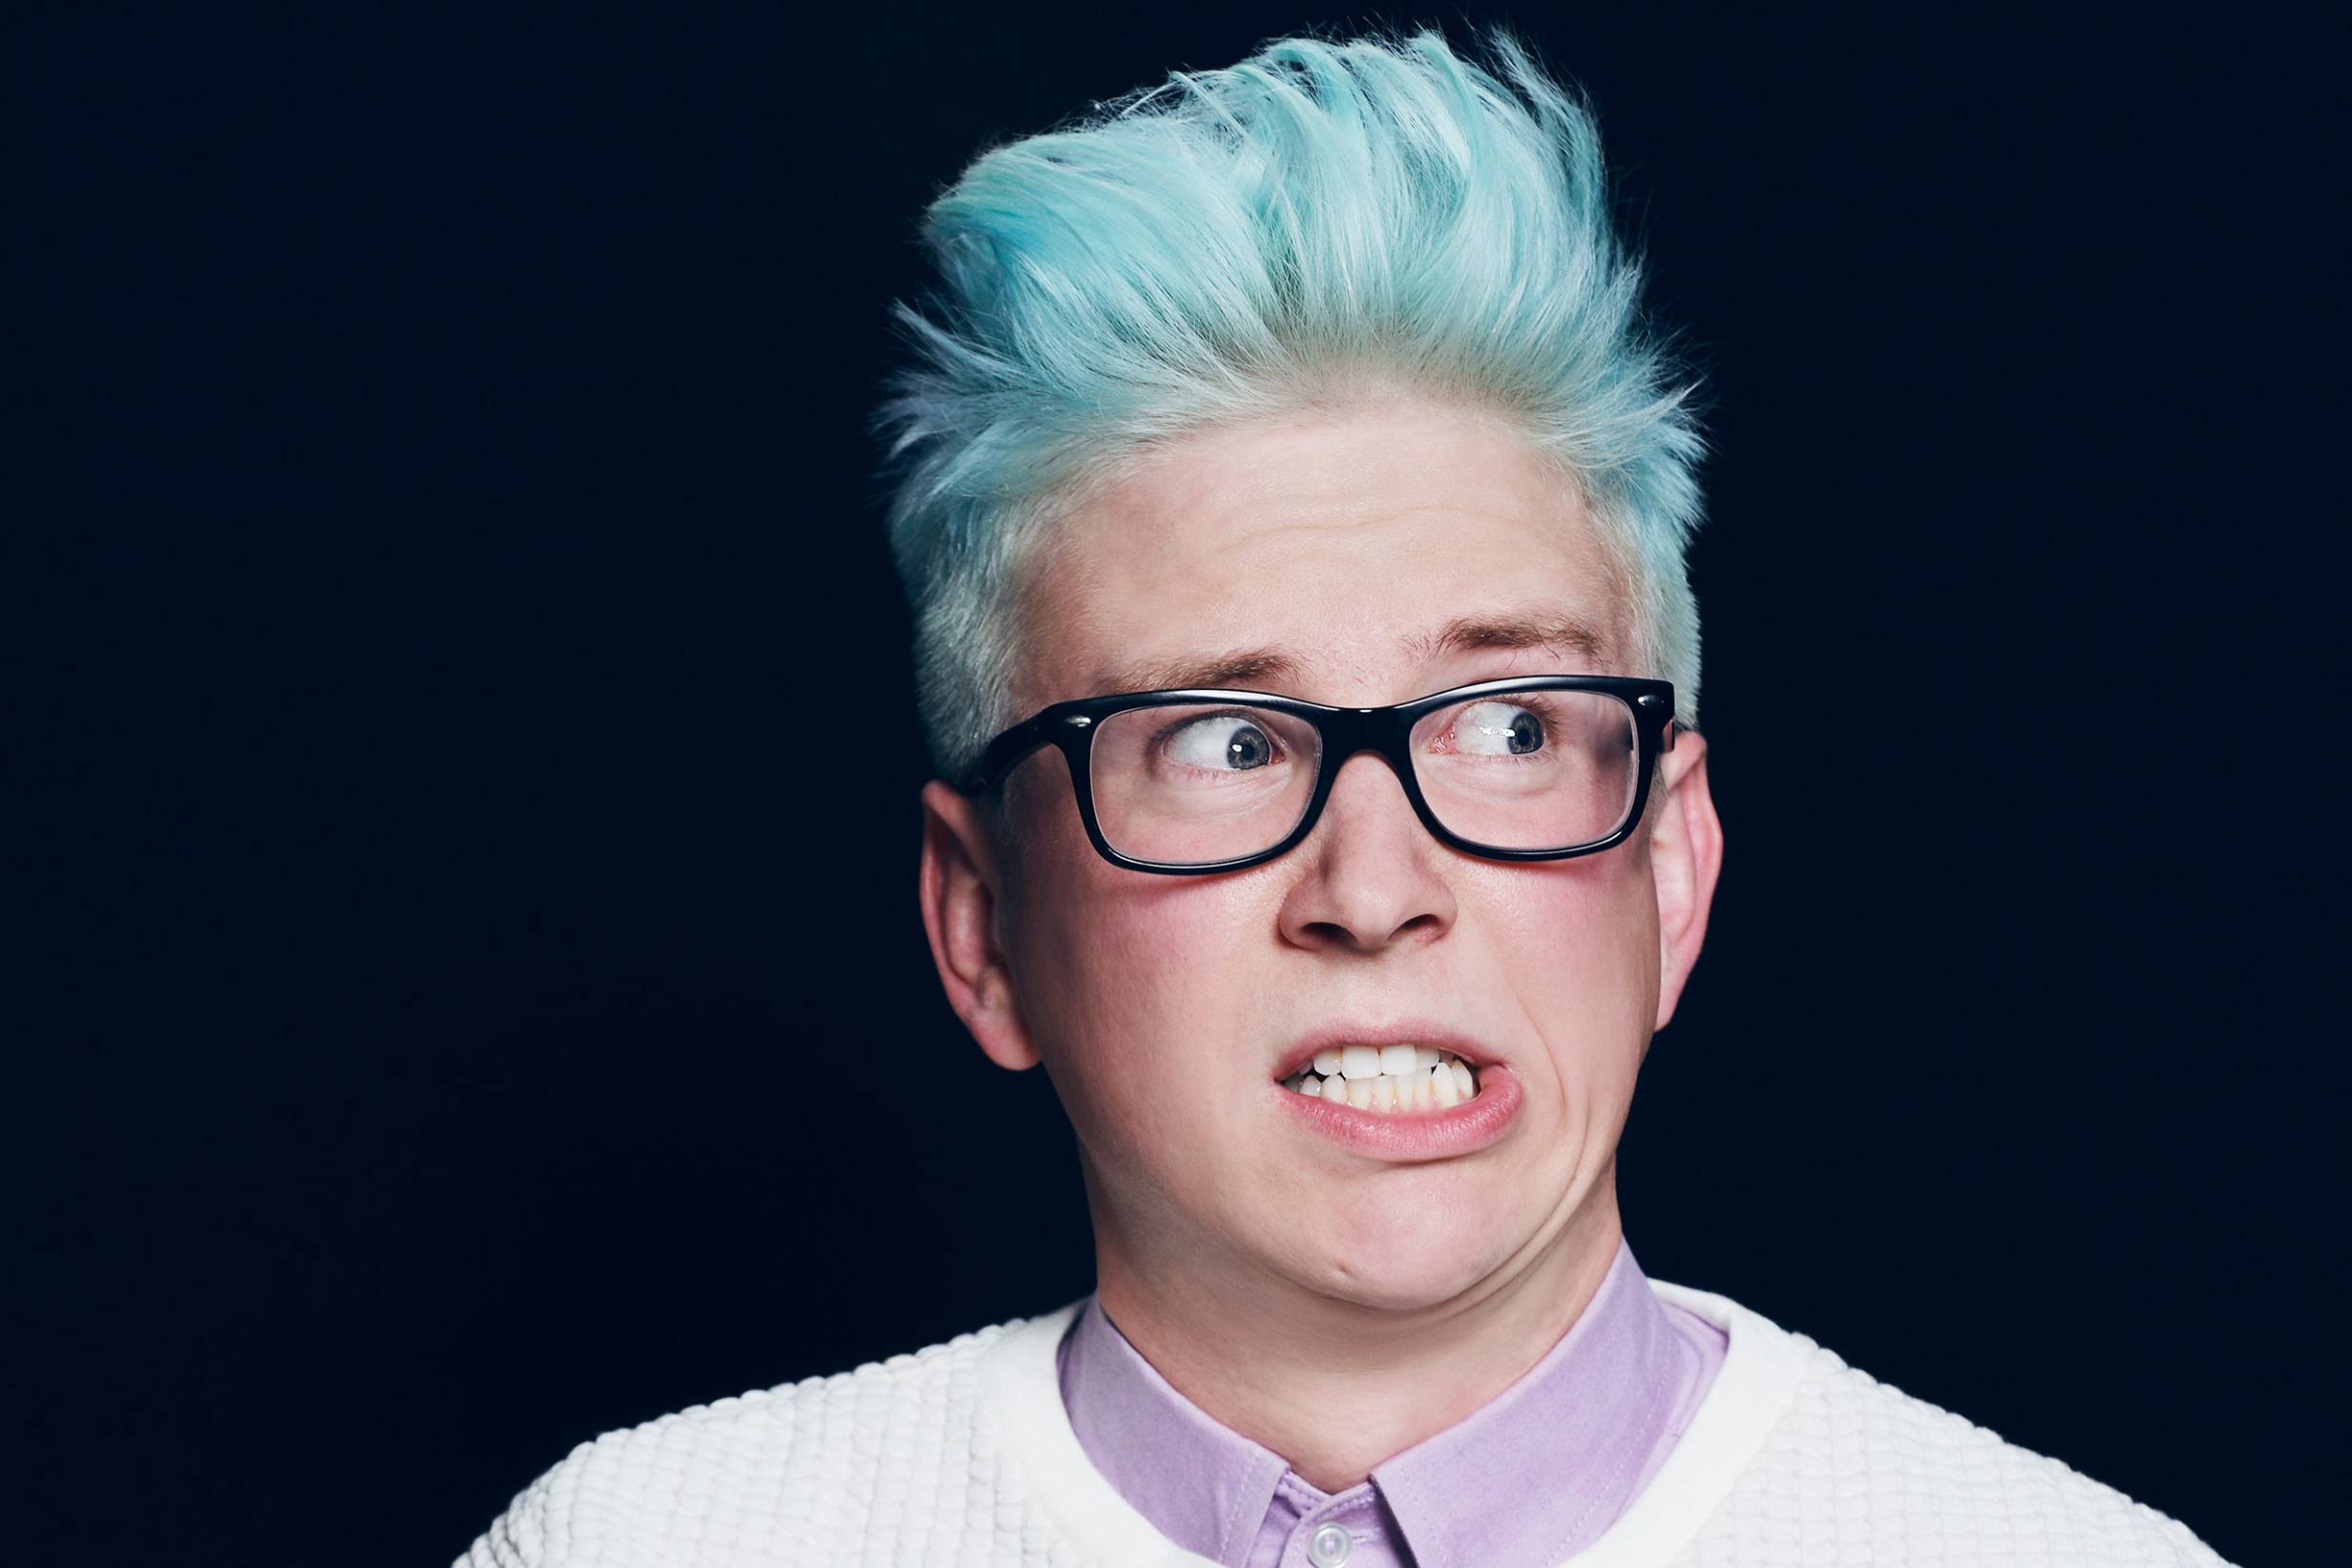 YouTube personality Tyler Oakley coming to Illini Union November 9th